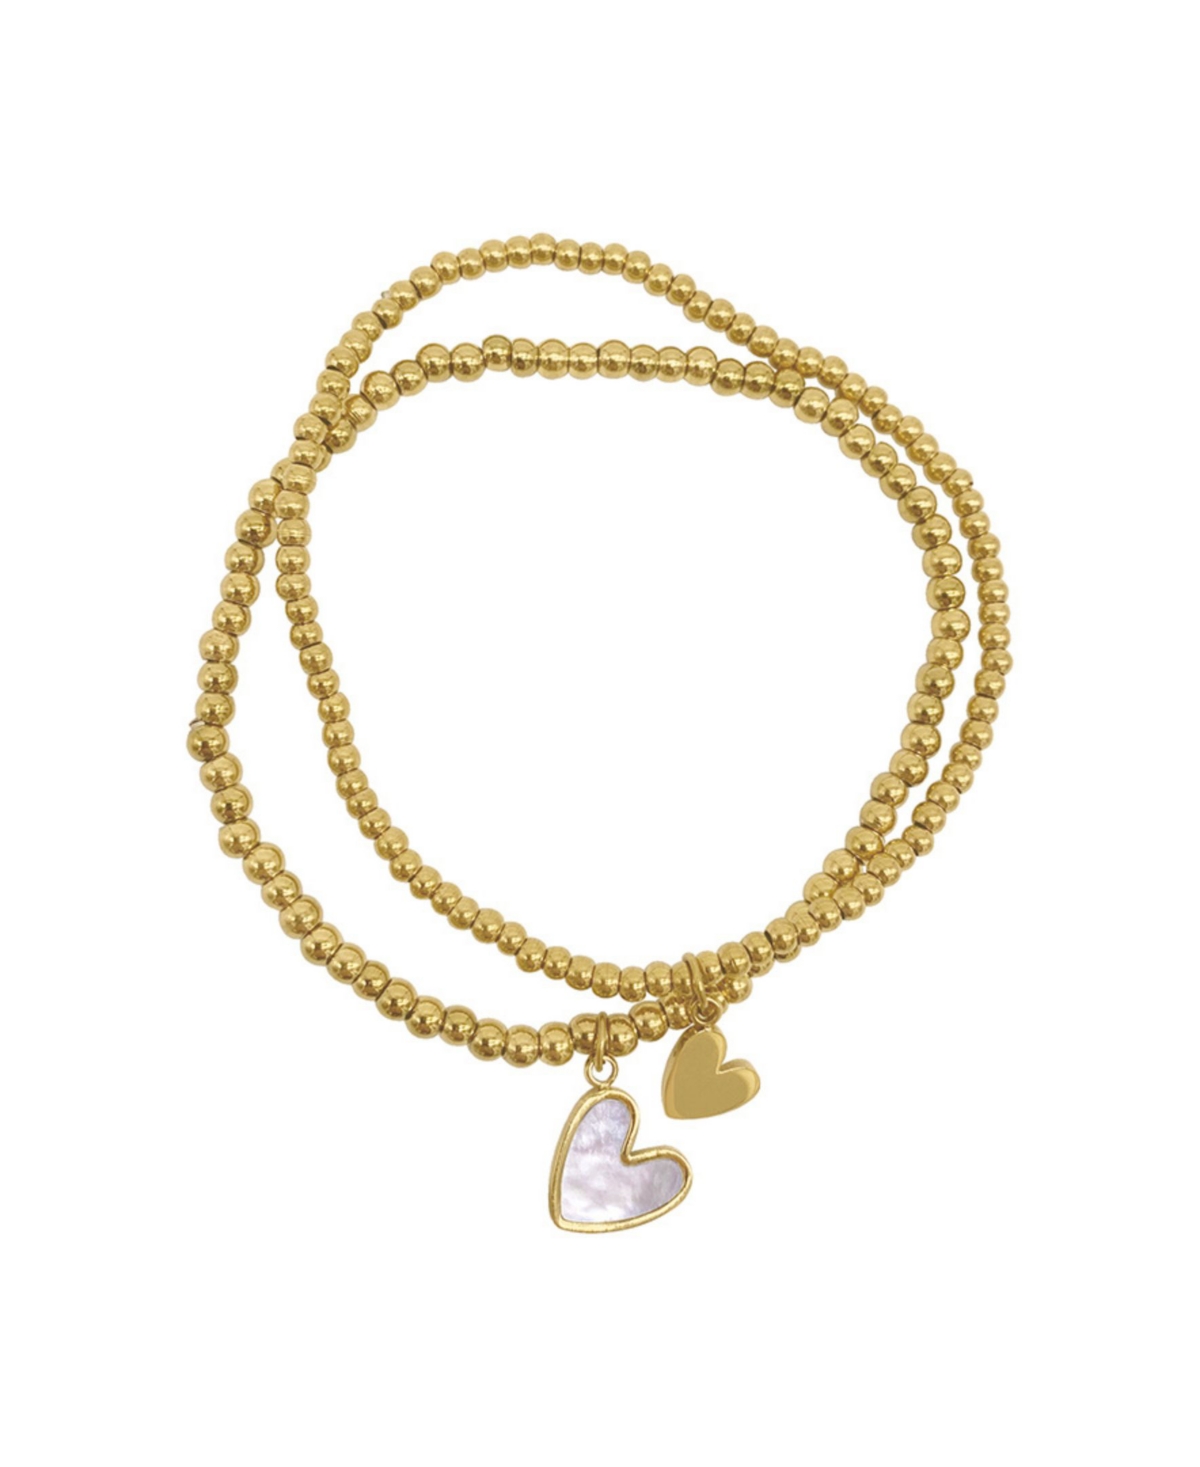 Shop Adornia 14k Gold Plated Stretch Heart Ball Bracelets With Imitation Mother Of Pearl, 2 Pieces